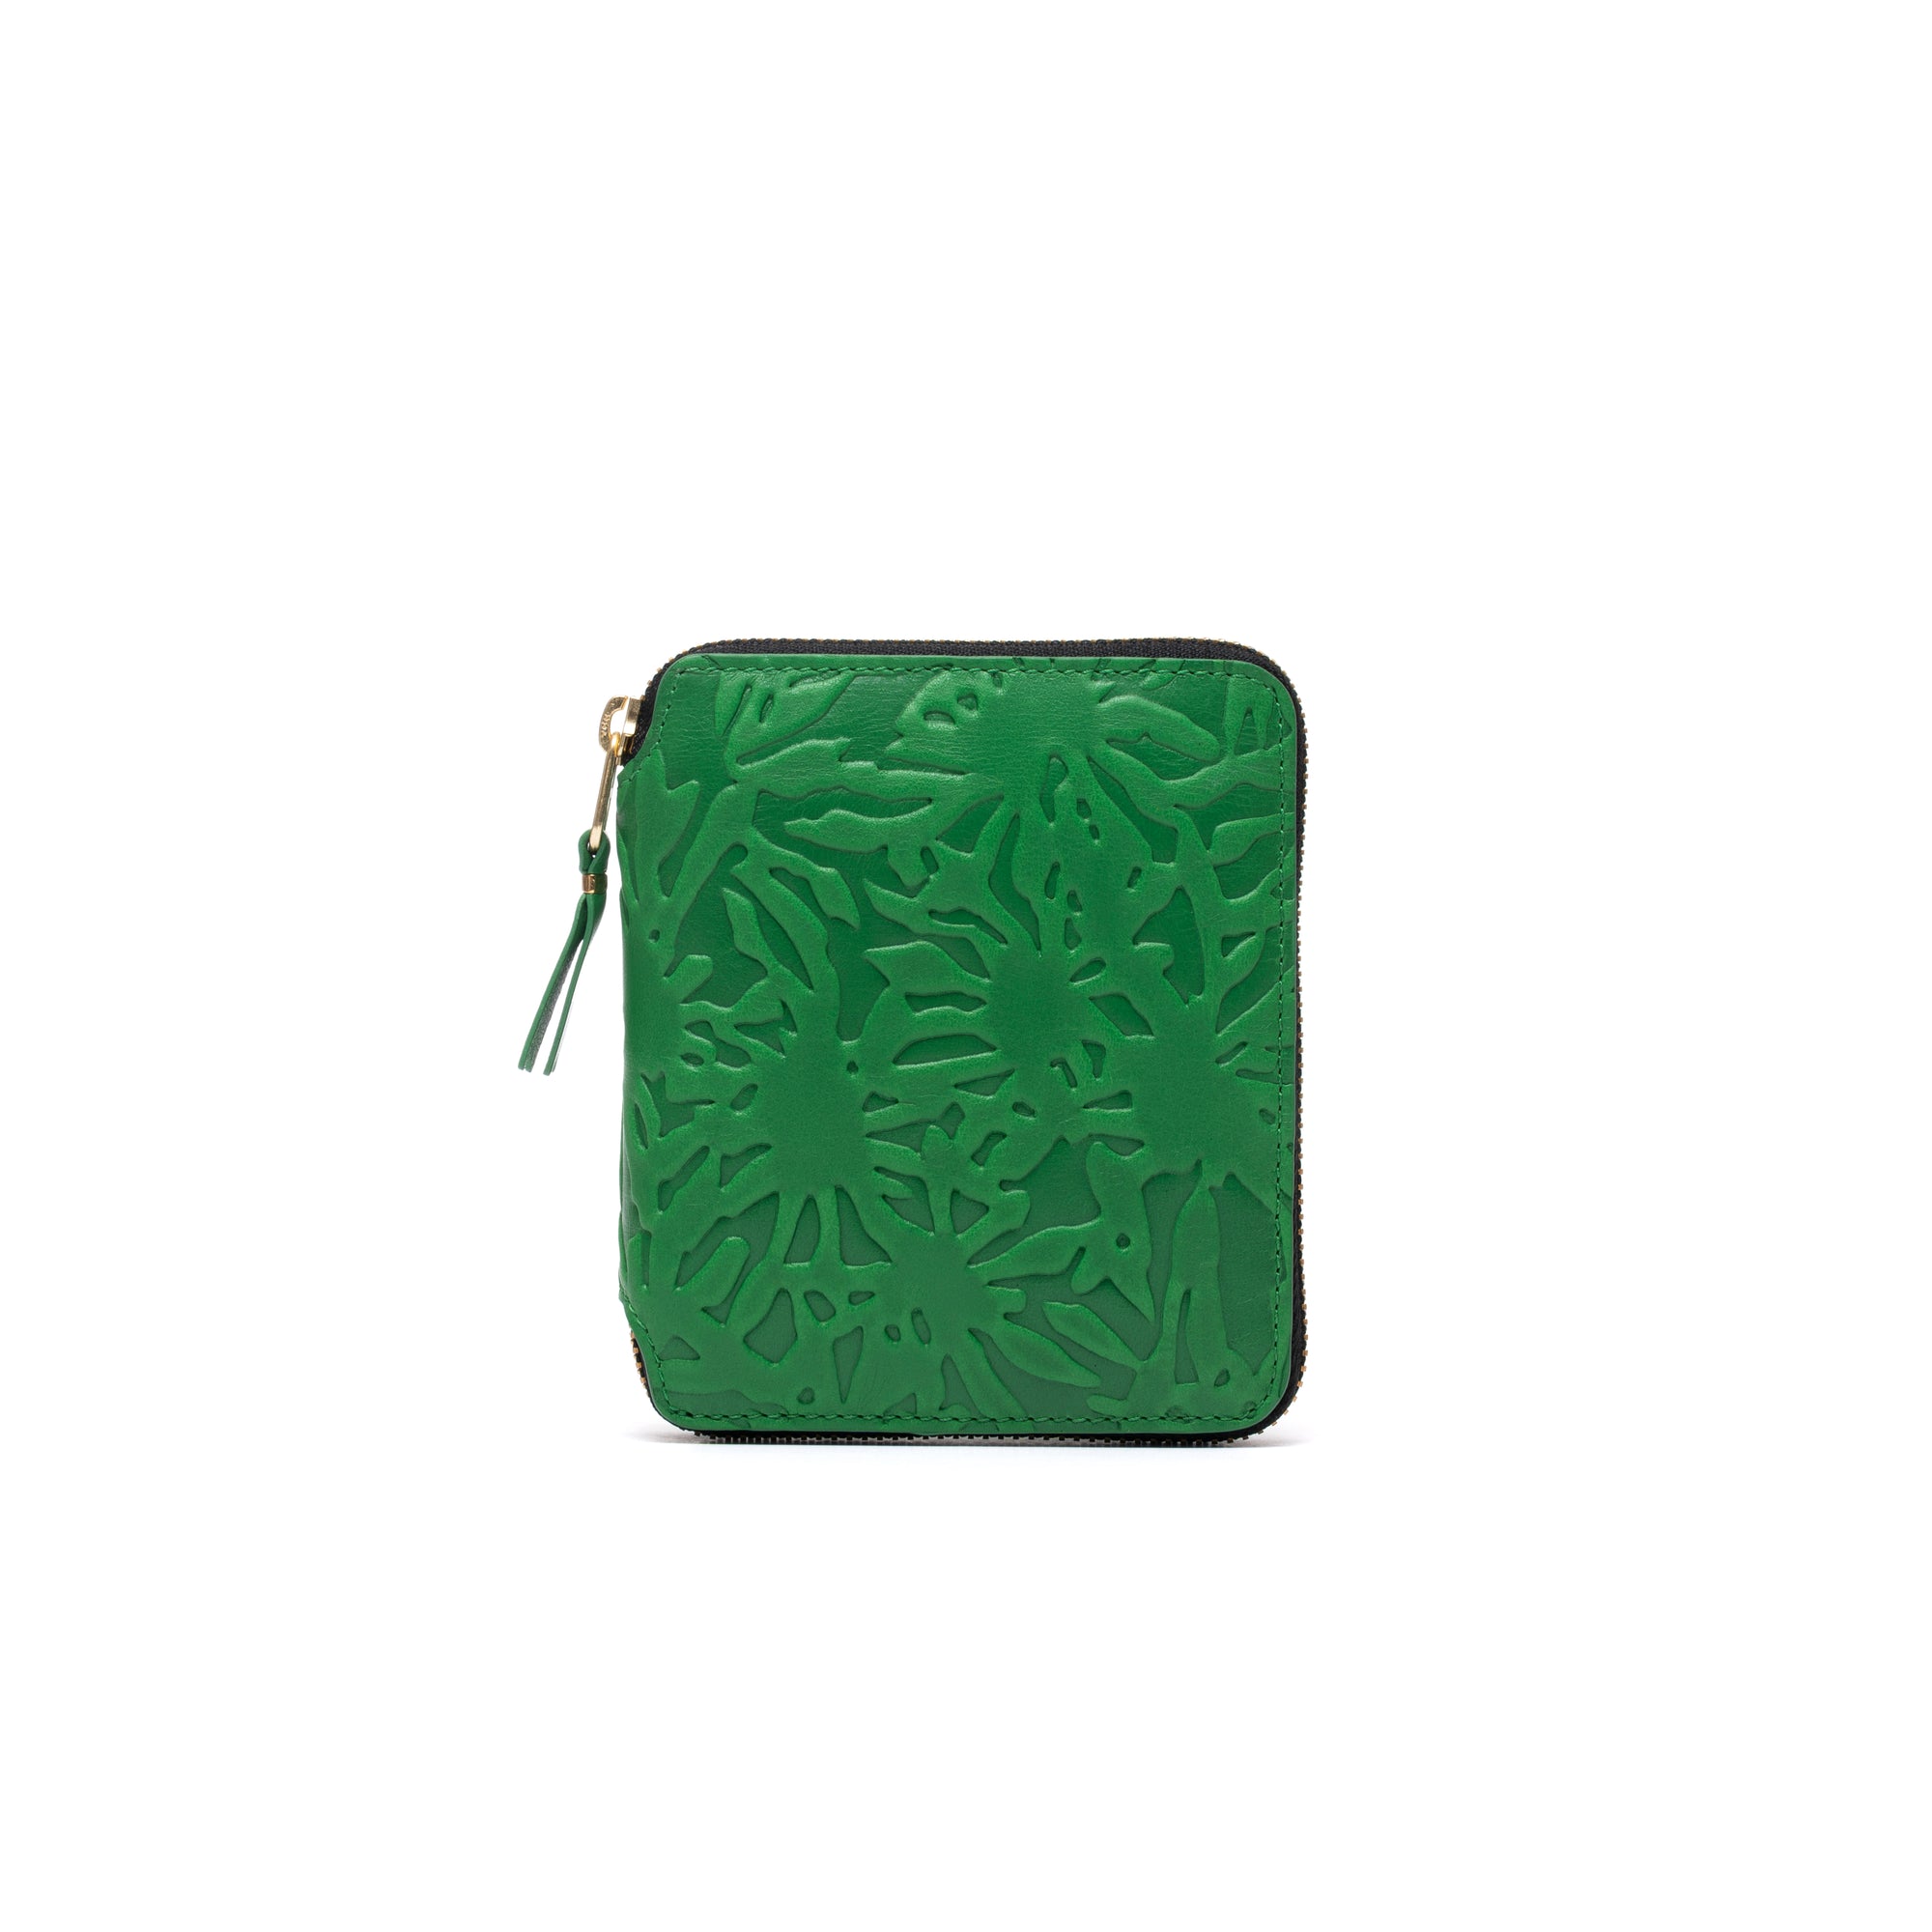 CDG WALLET - Embossed Forest - (SA2100EF Green) view 1